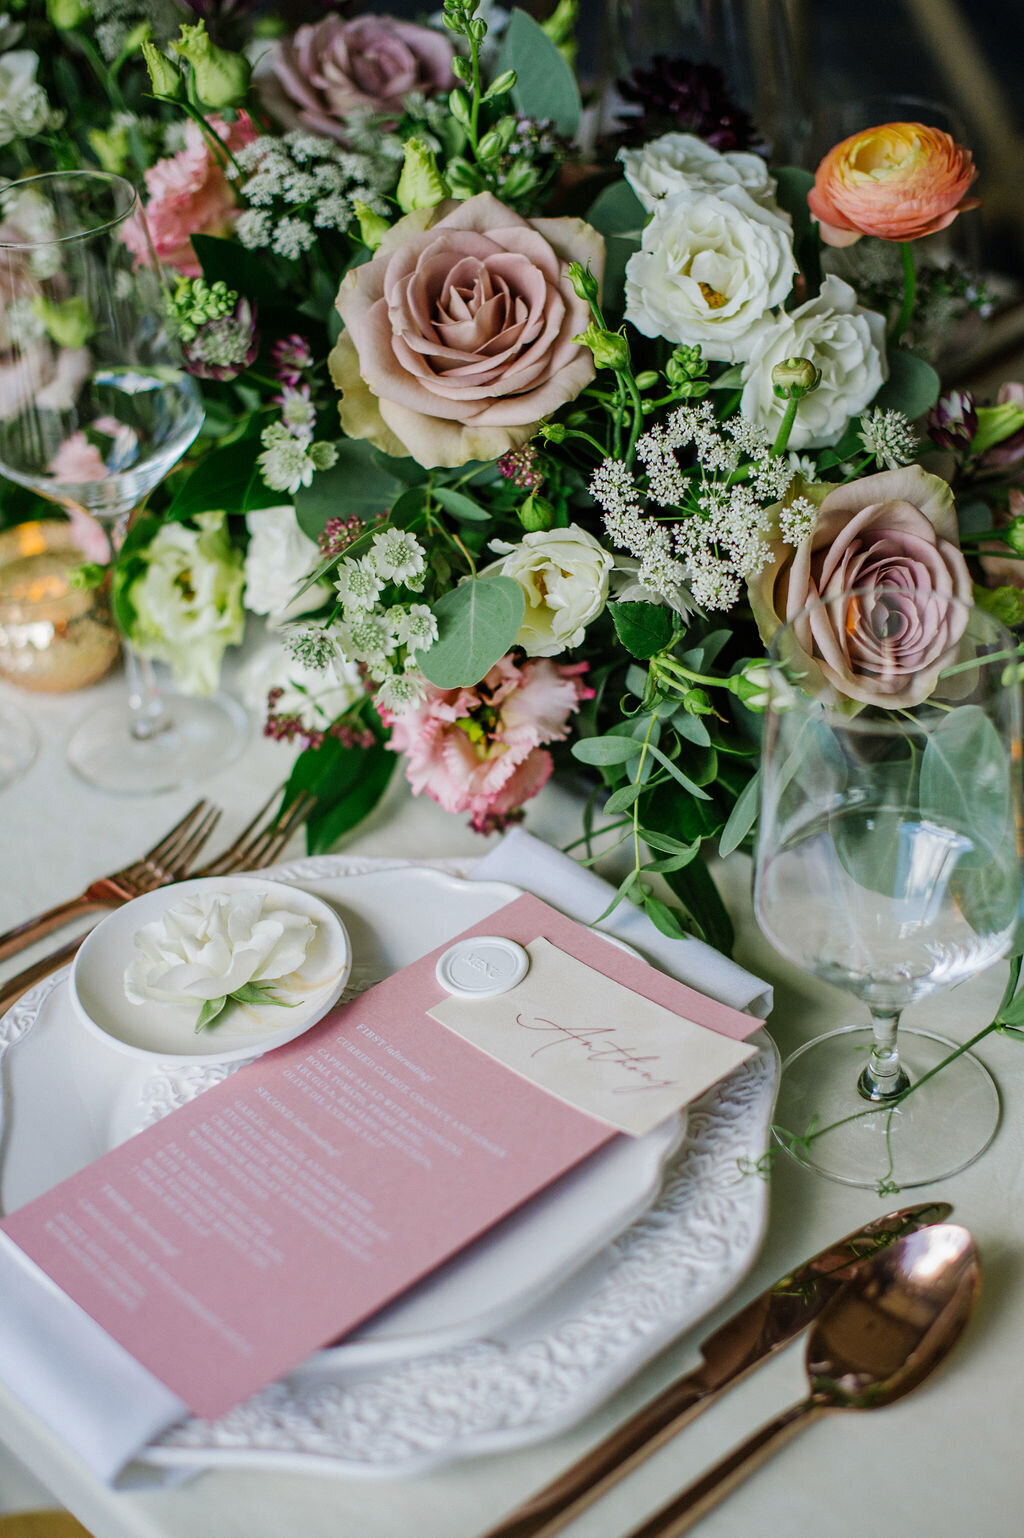 Elegant pink and white tablescape by CNC Event Design, modern and elegant wedding planner based in Calgary, Alberta.  Featured on the Brontë Bride Vendor Guide.